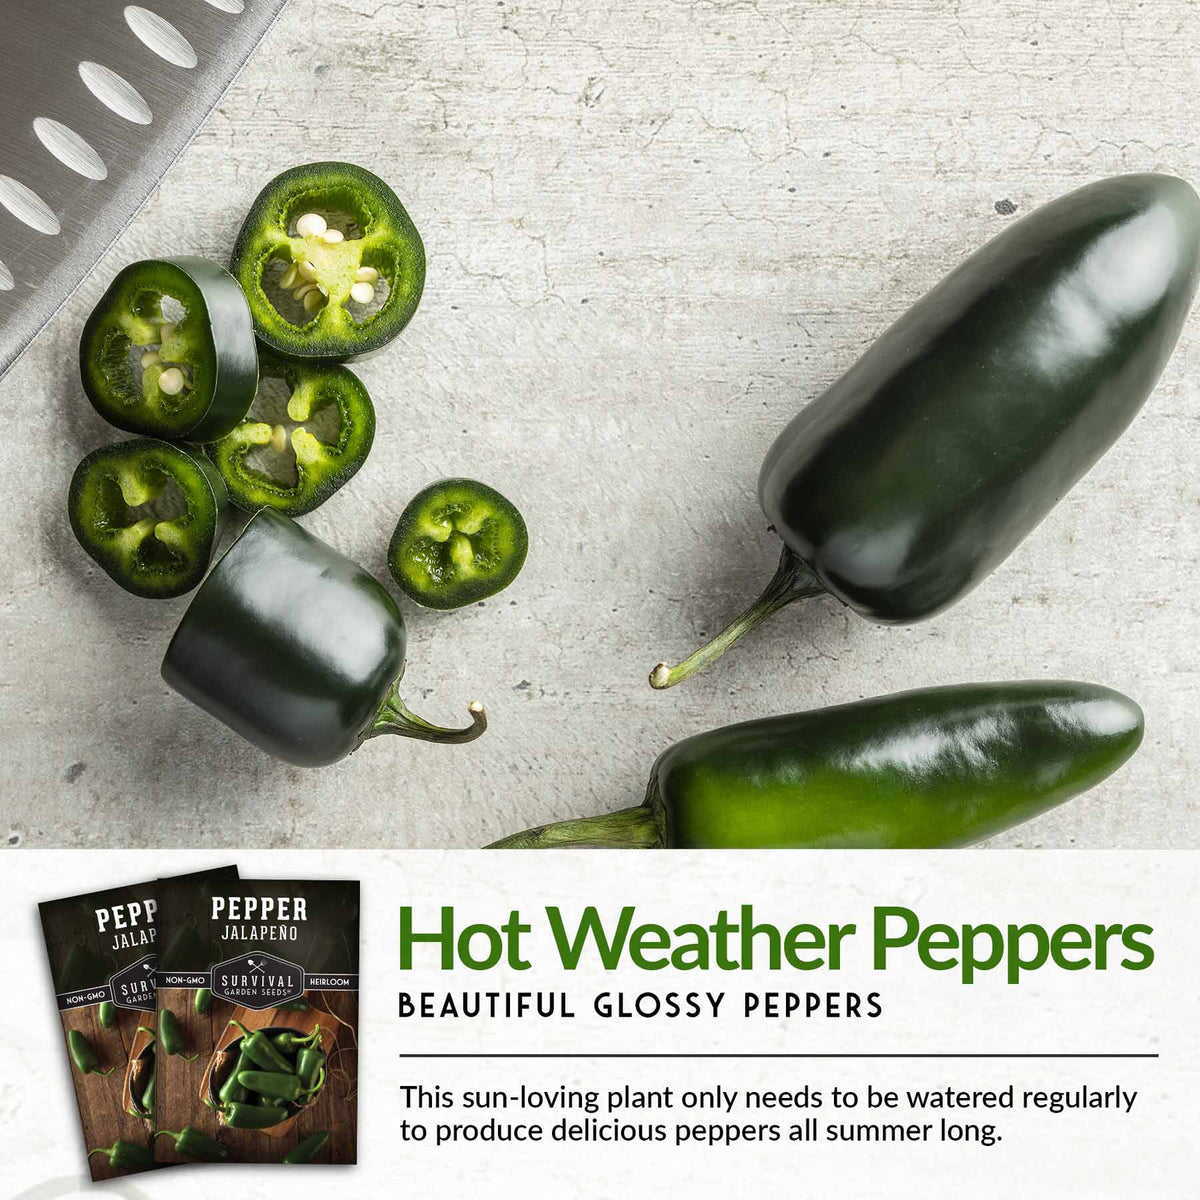 Hot weather peppers